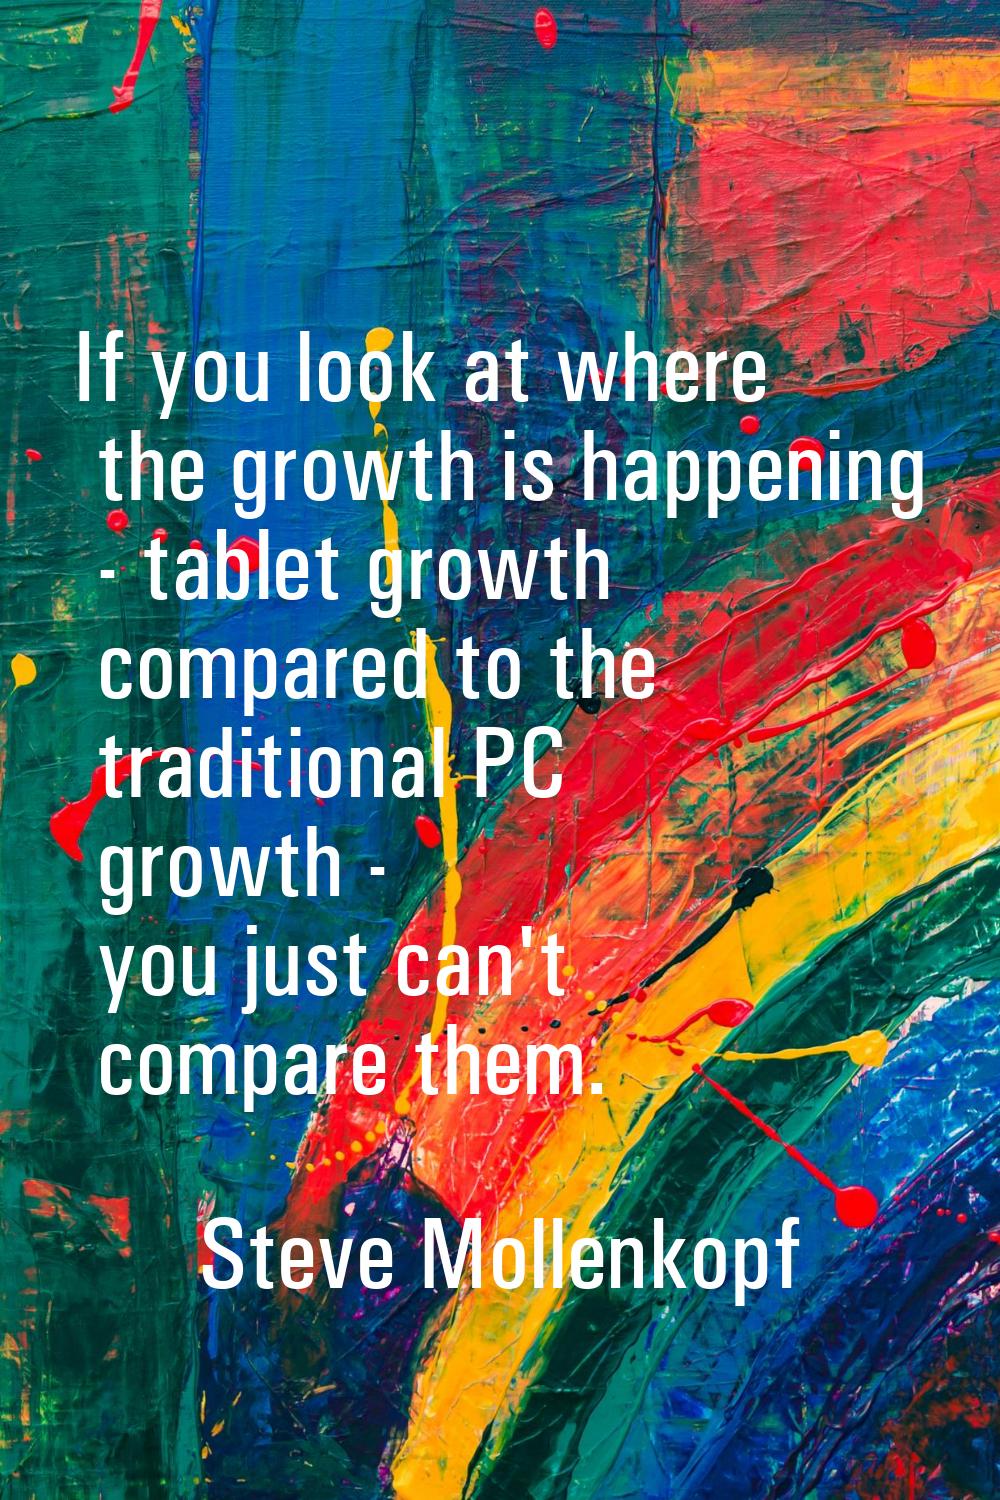 If you look at where the growth is happening - tablet growth compared to the traditional PC growth 